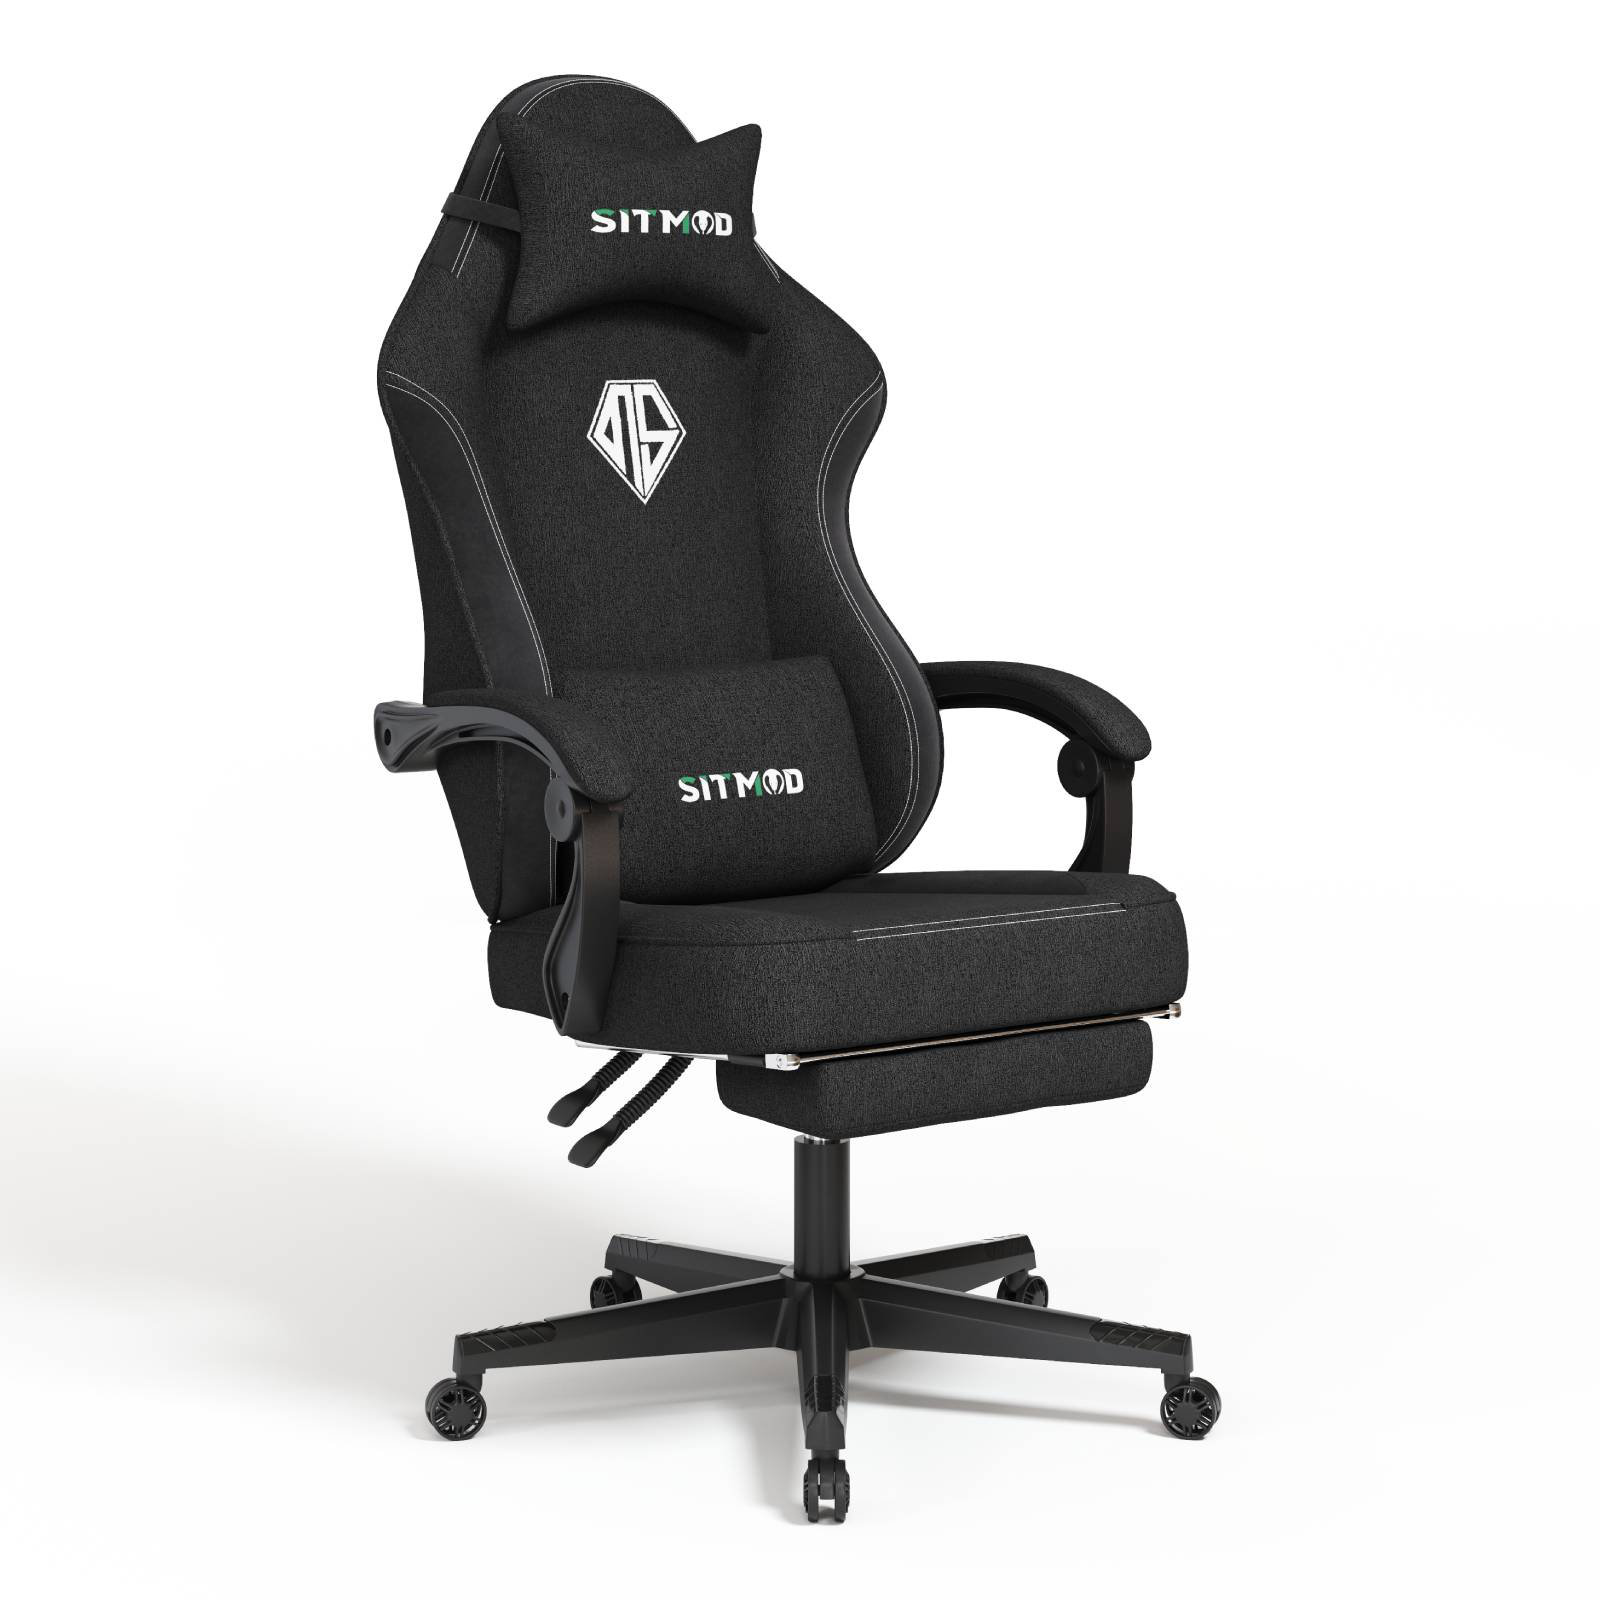 SITMOD Adjustable Reclining Ergonomic Swiveling PC & Racing Game Chair with  Footrest in Black